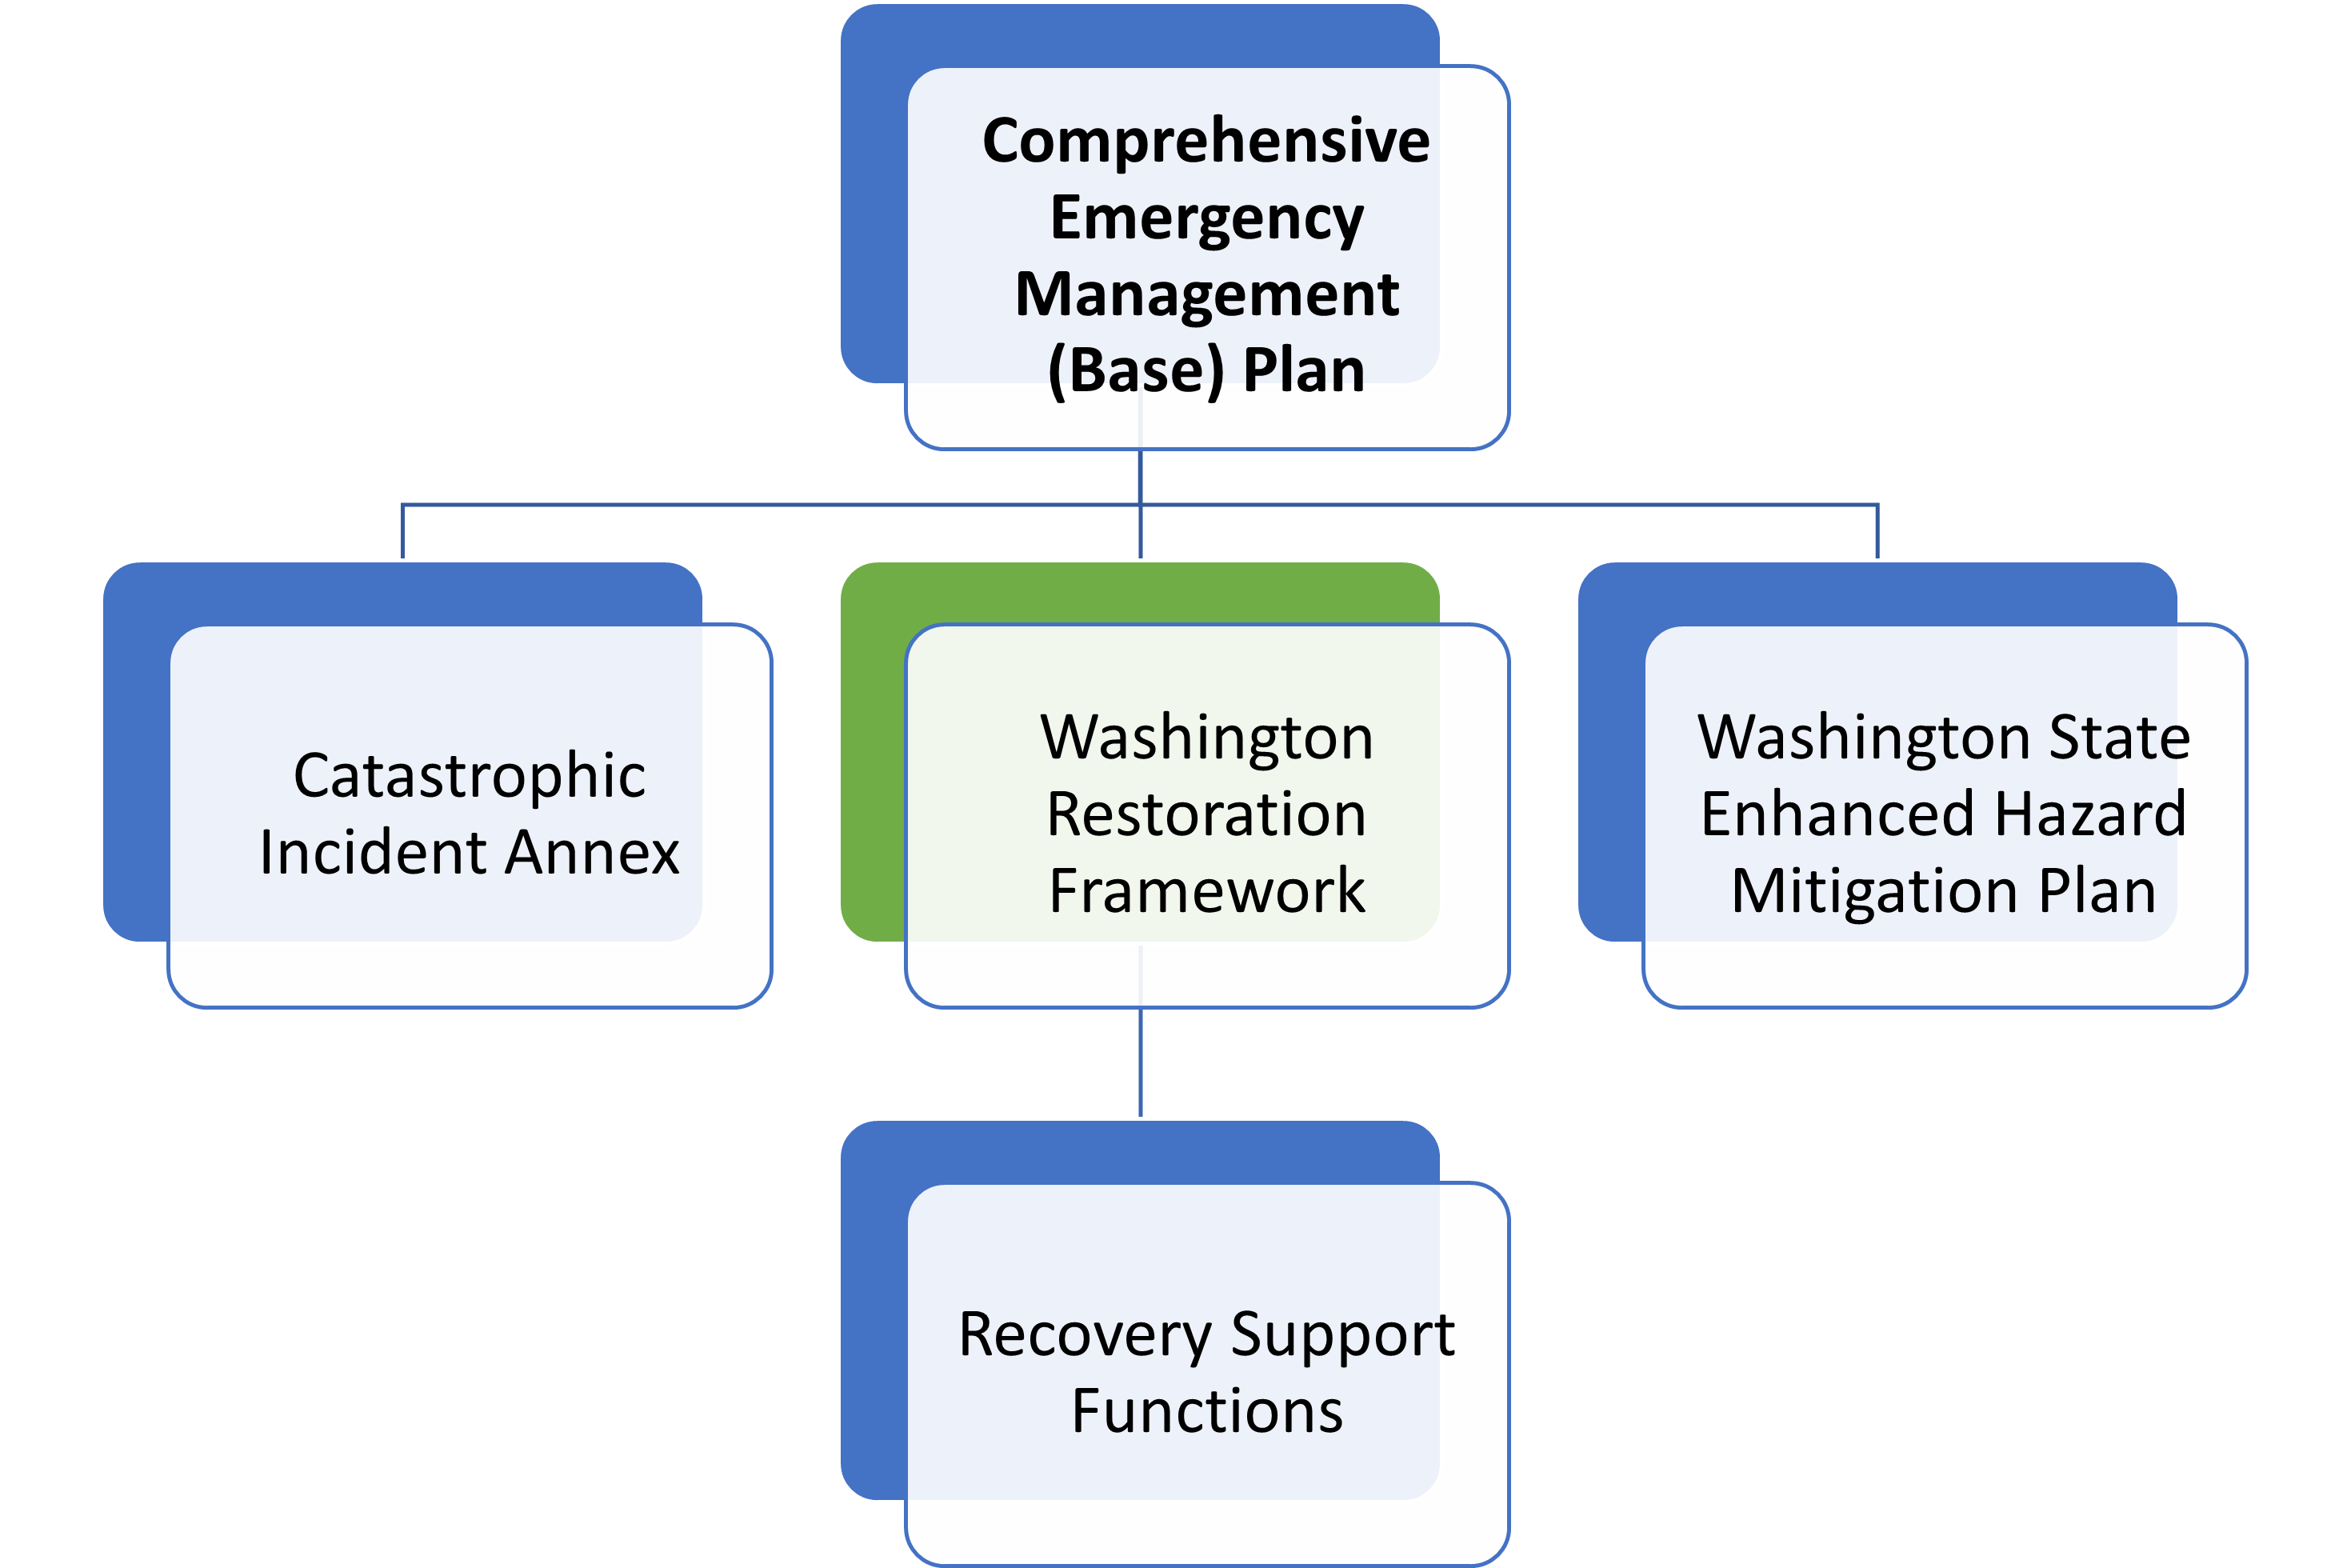 The Washington Restoration Framework (WRF), like other state emergency planning documents, fall under the Comprehensive Emergency Management (Base) Plan at the top. The WRF is on the same level as other state emergency plans and the Recovery Support Functions reside under the WRF.